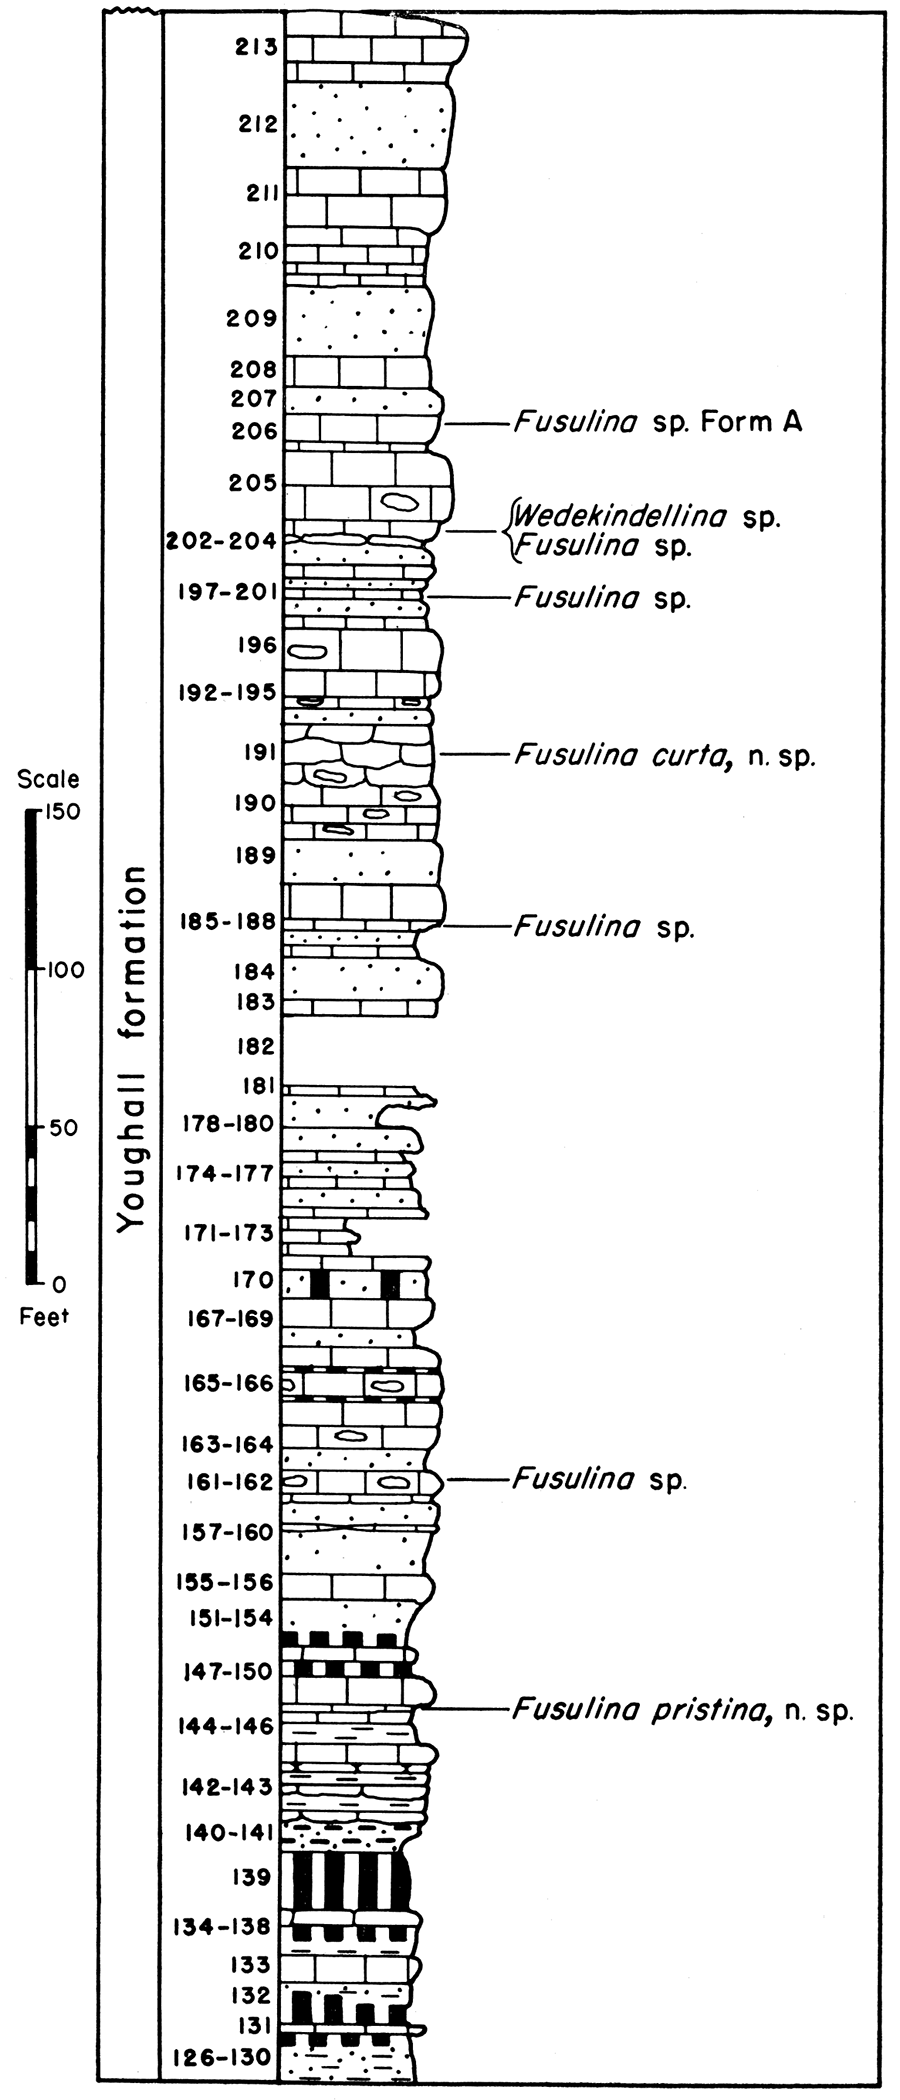 Diagram and fusulinid faunas of the Youghall formation, Section P-13, Juniper Mountain Canyon.